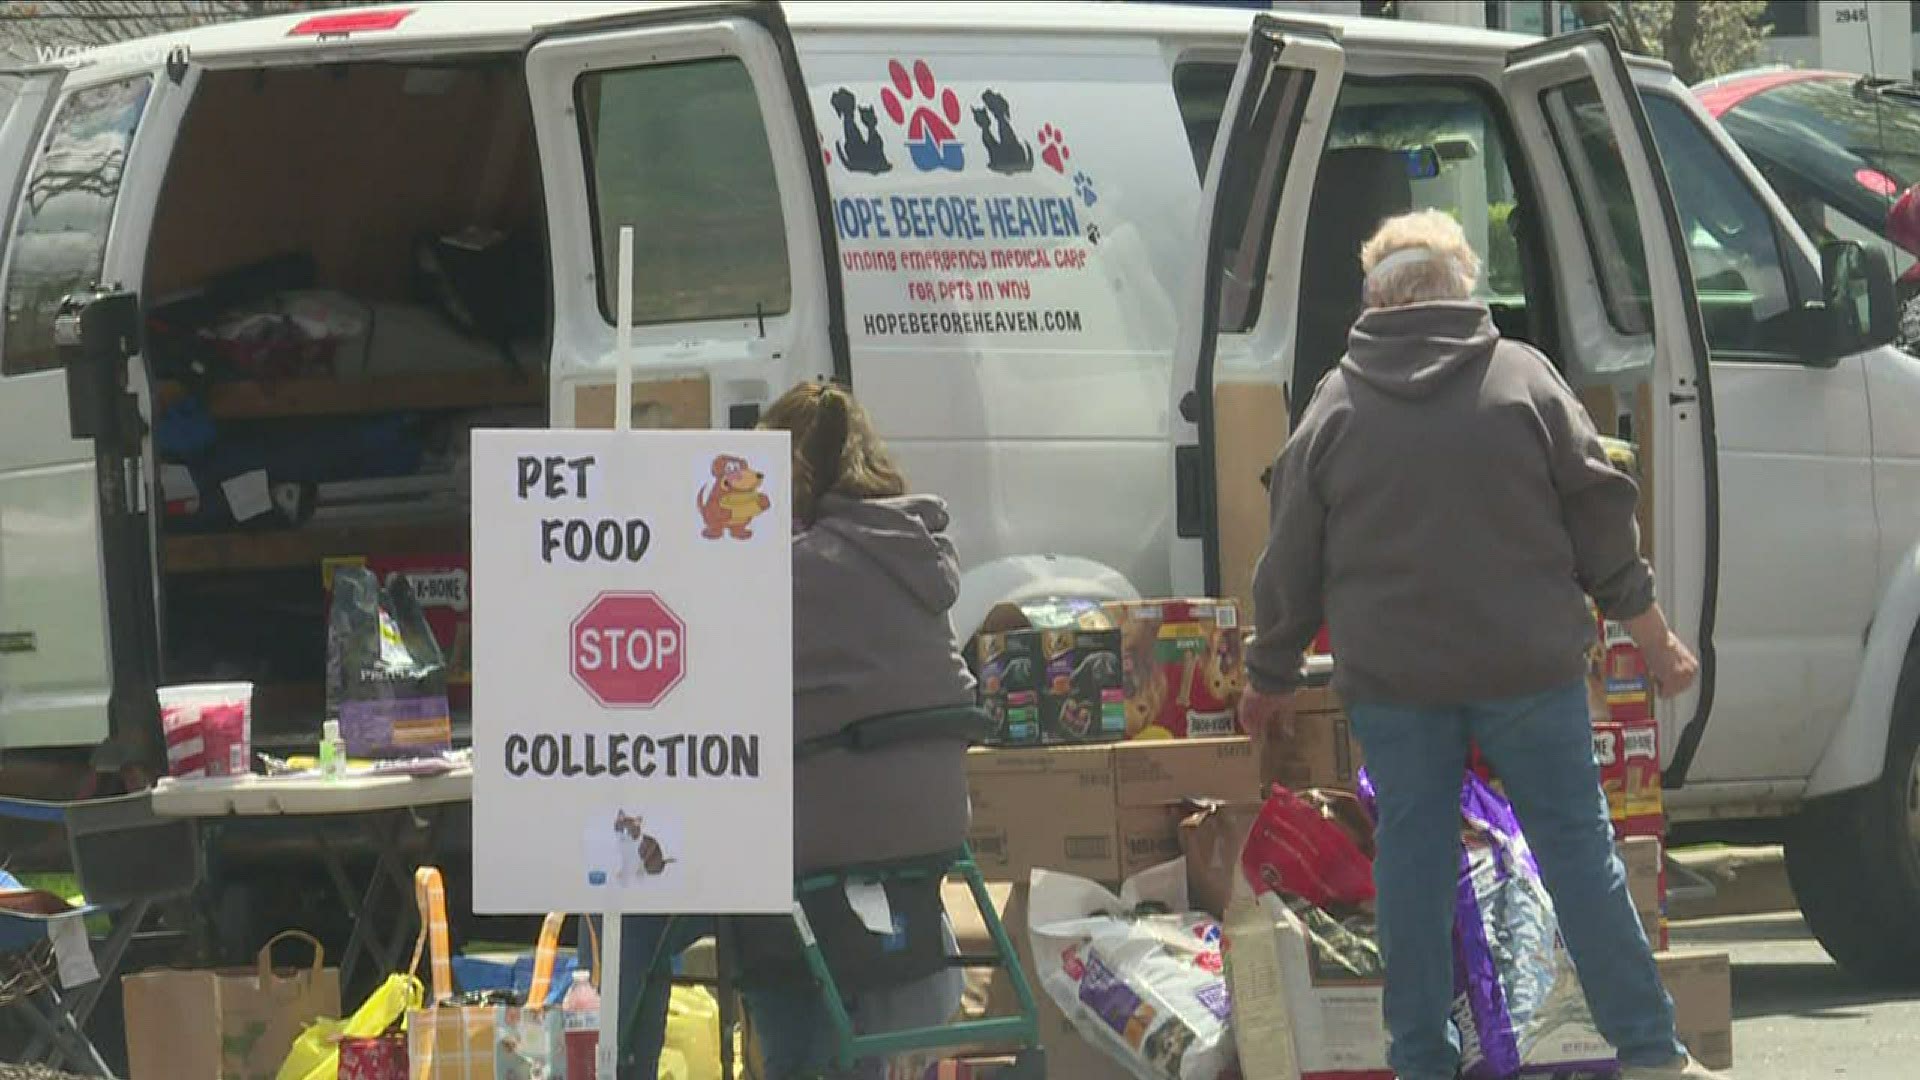 All food collected at the event will be sent to local pet food pantries, where it will be distributed to families struggling to feed their pets.